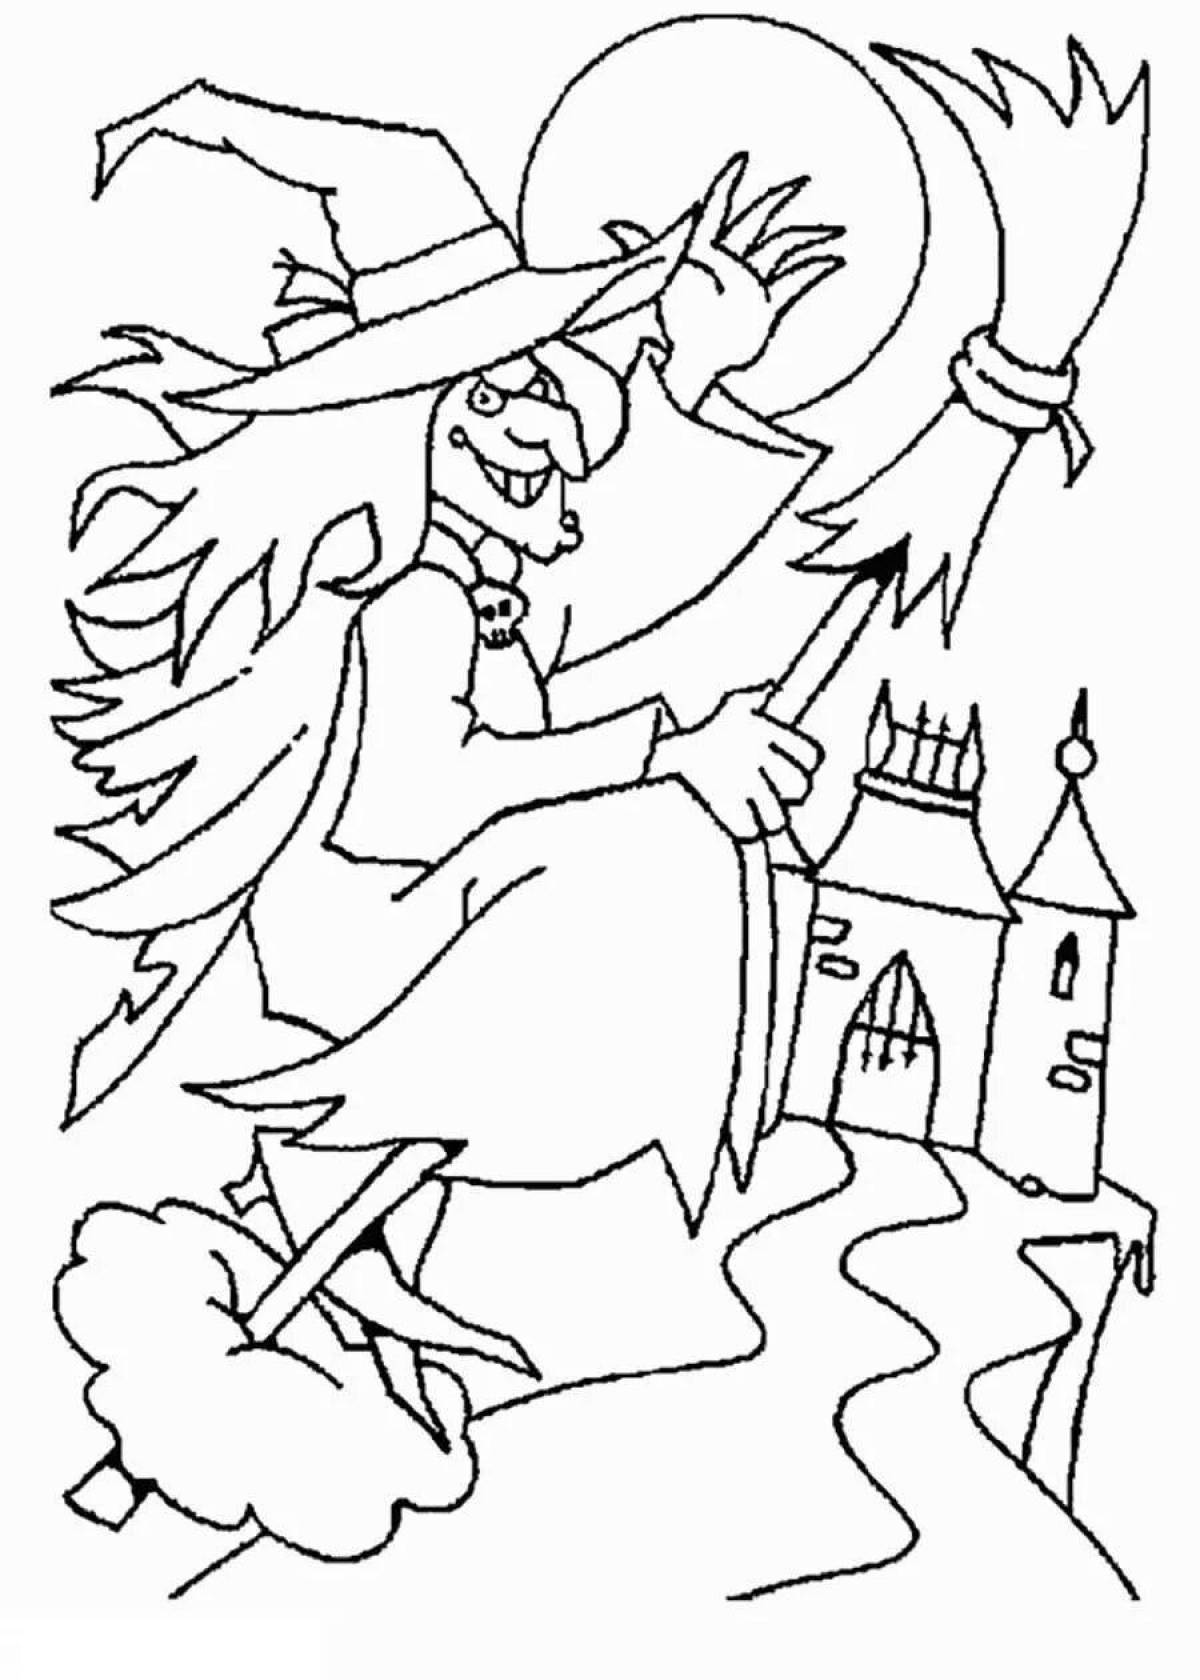 Coloring book radiant aya and witch